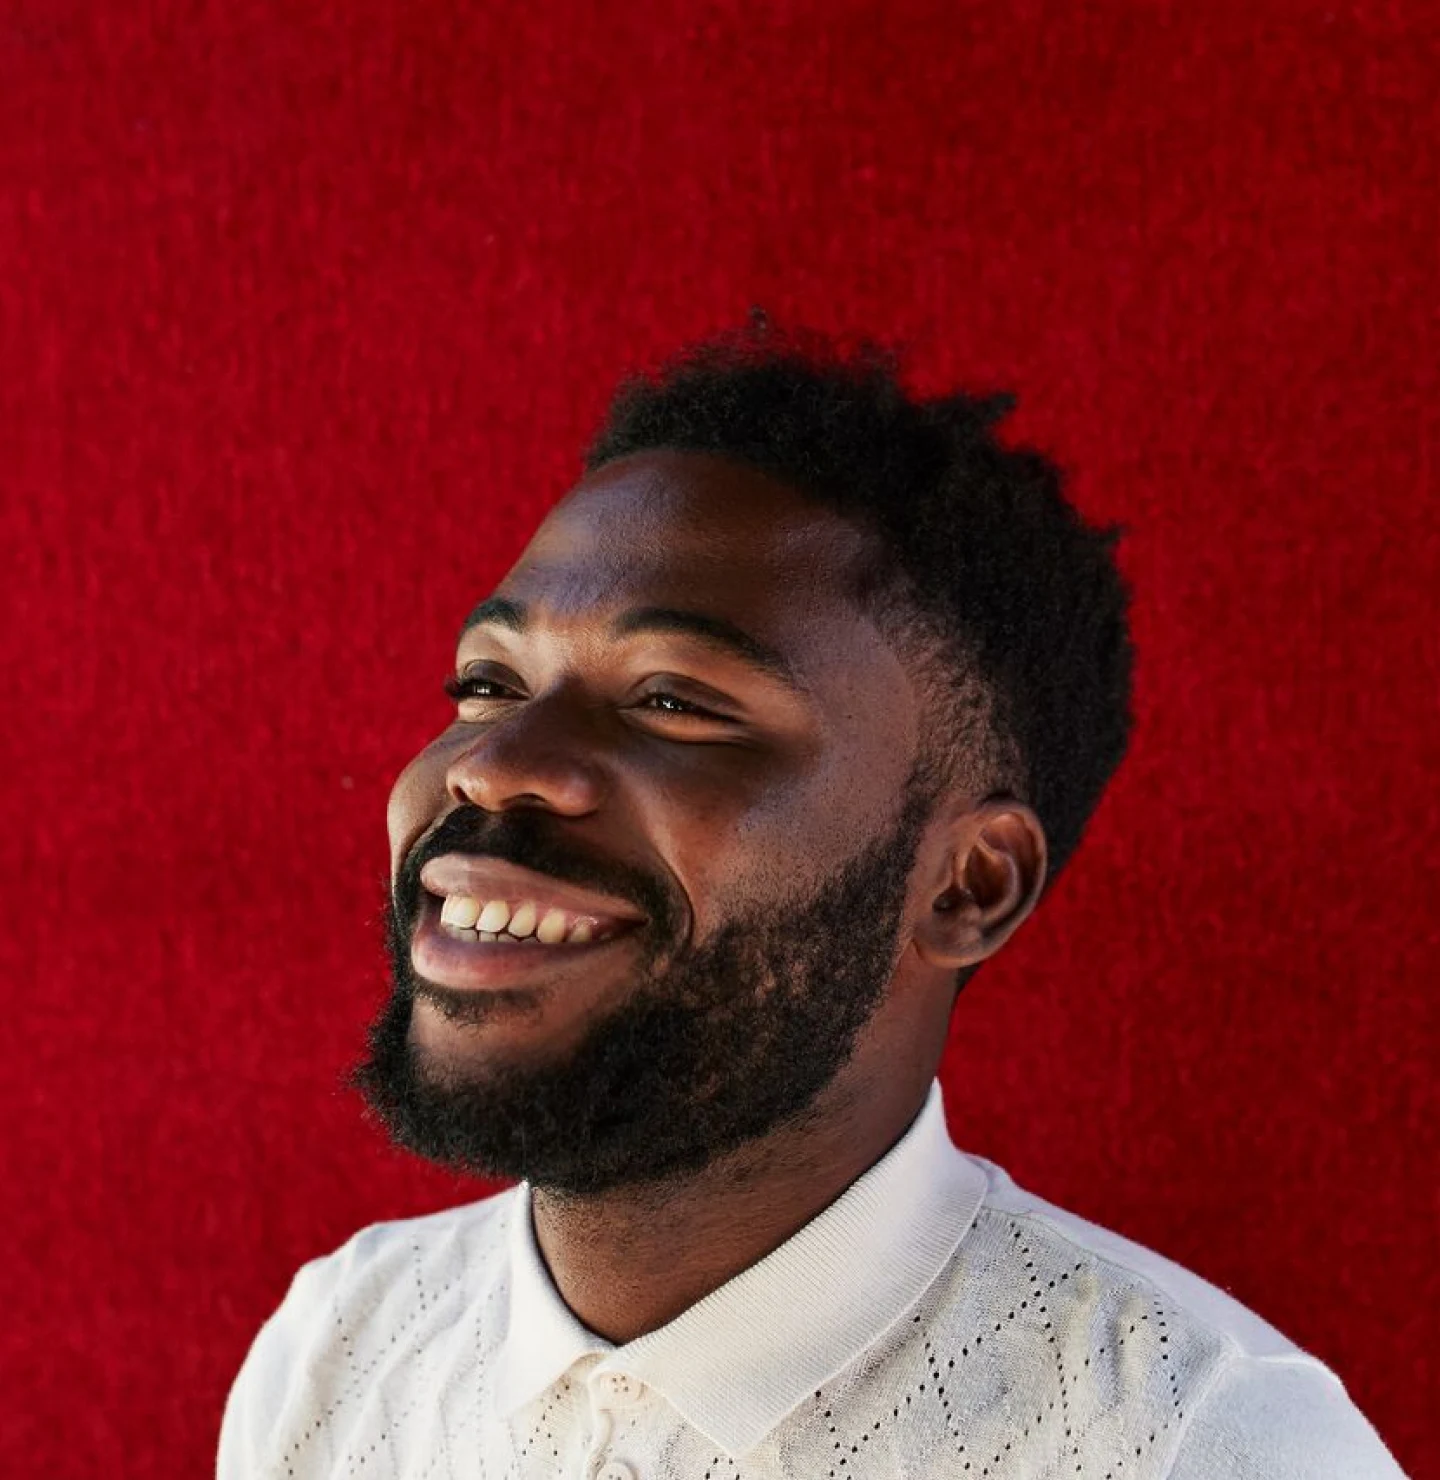 Smiling Black man with a white polo shirt smiles against a red background